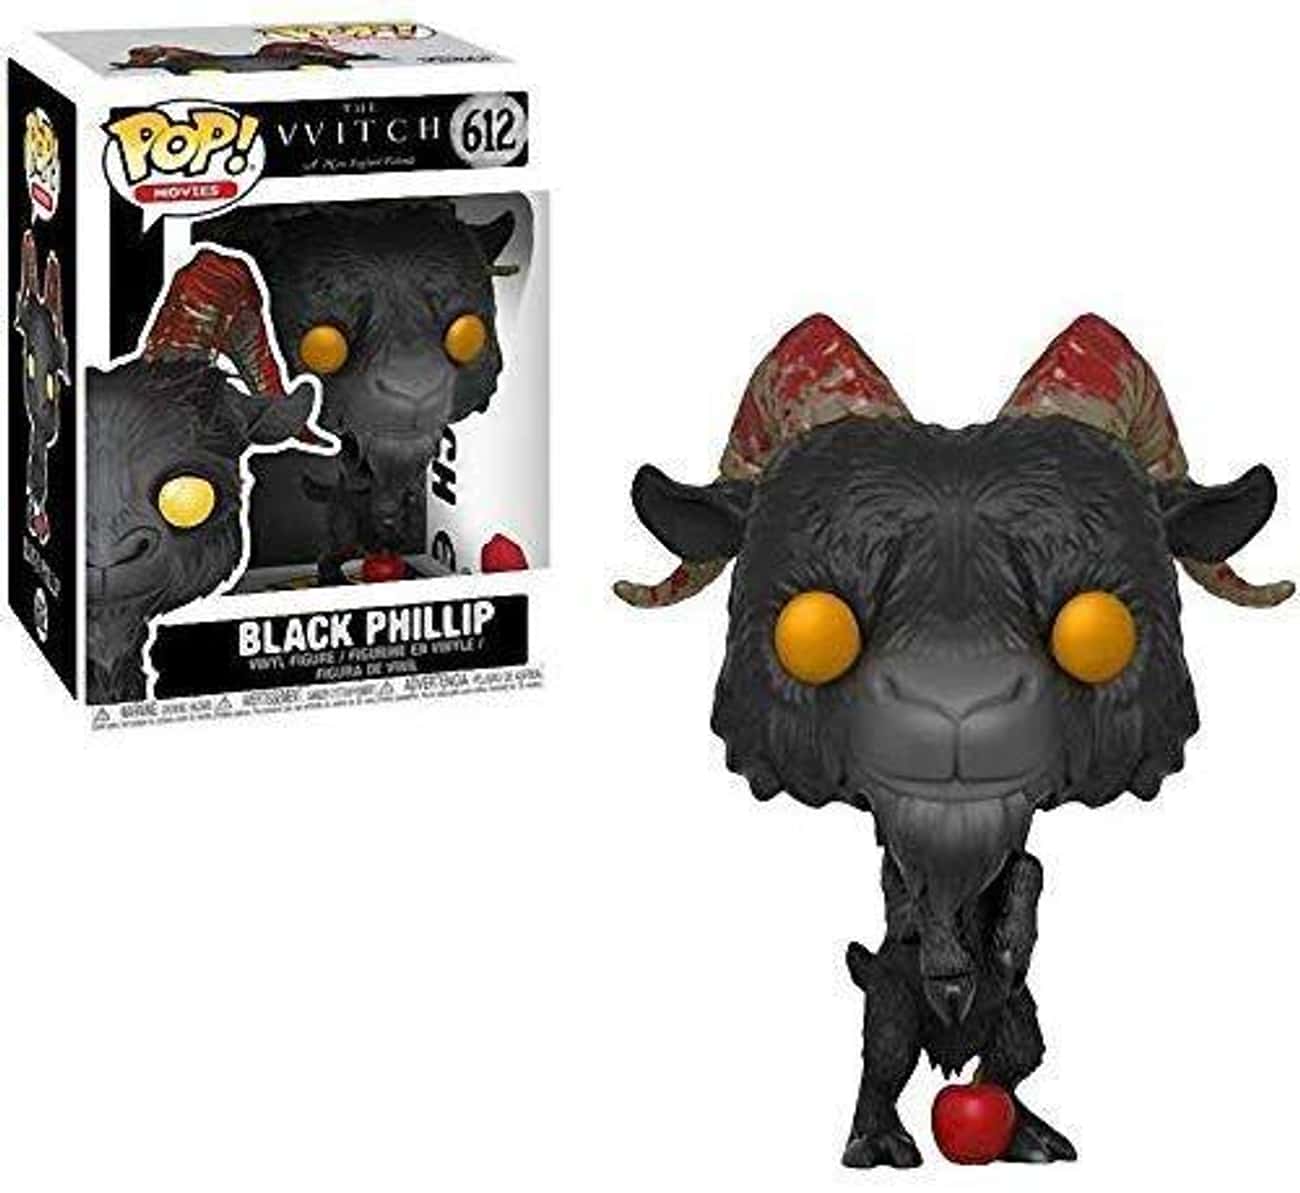 Black Phillip ('The Witch')